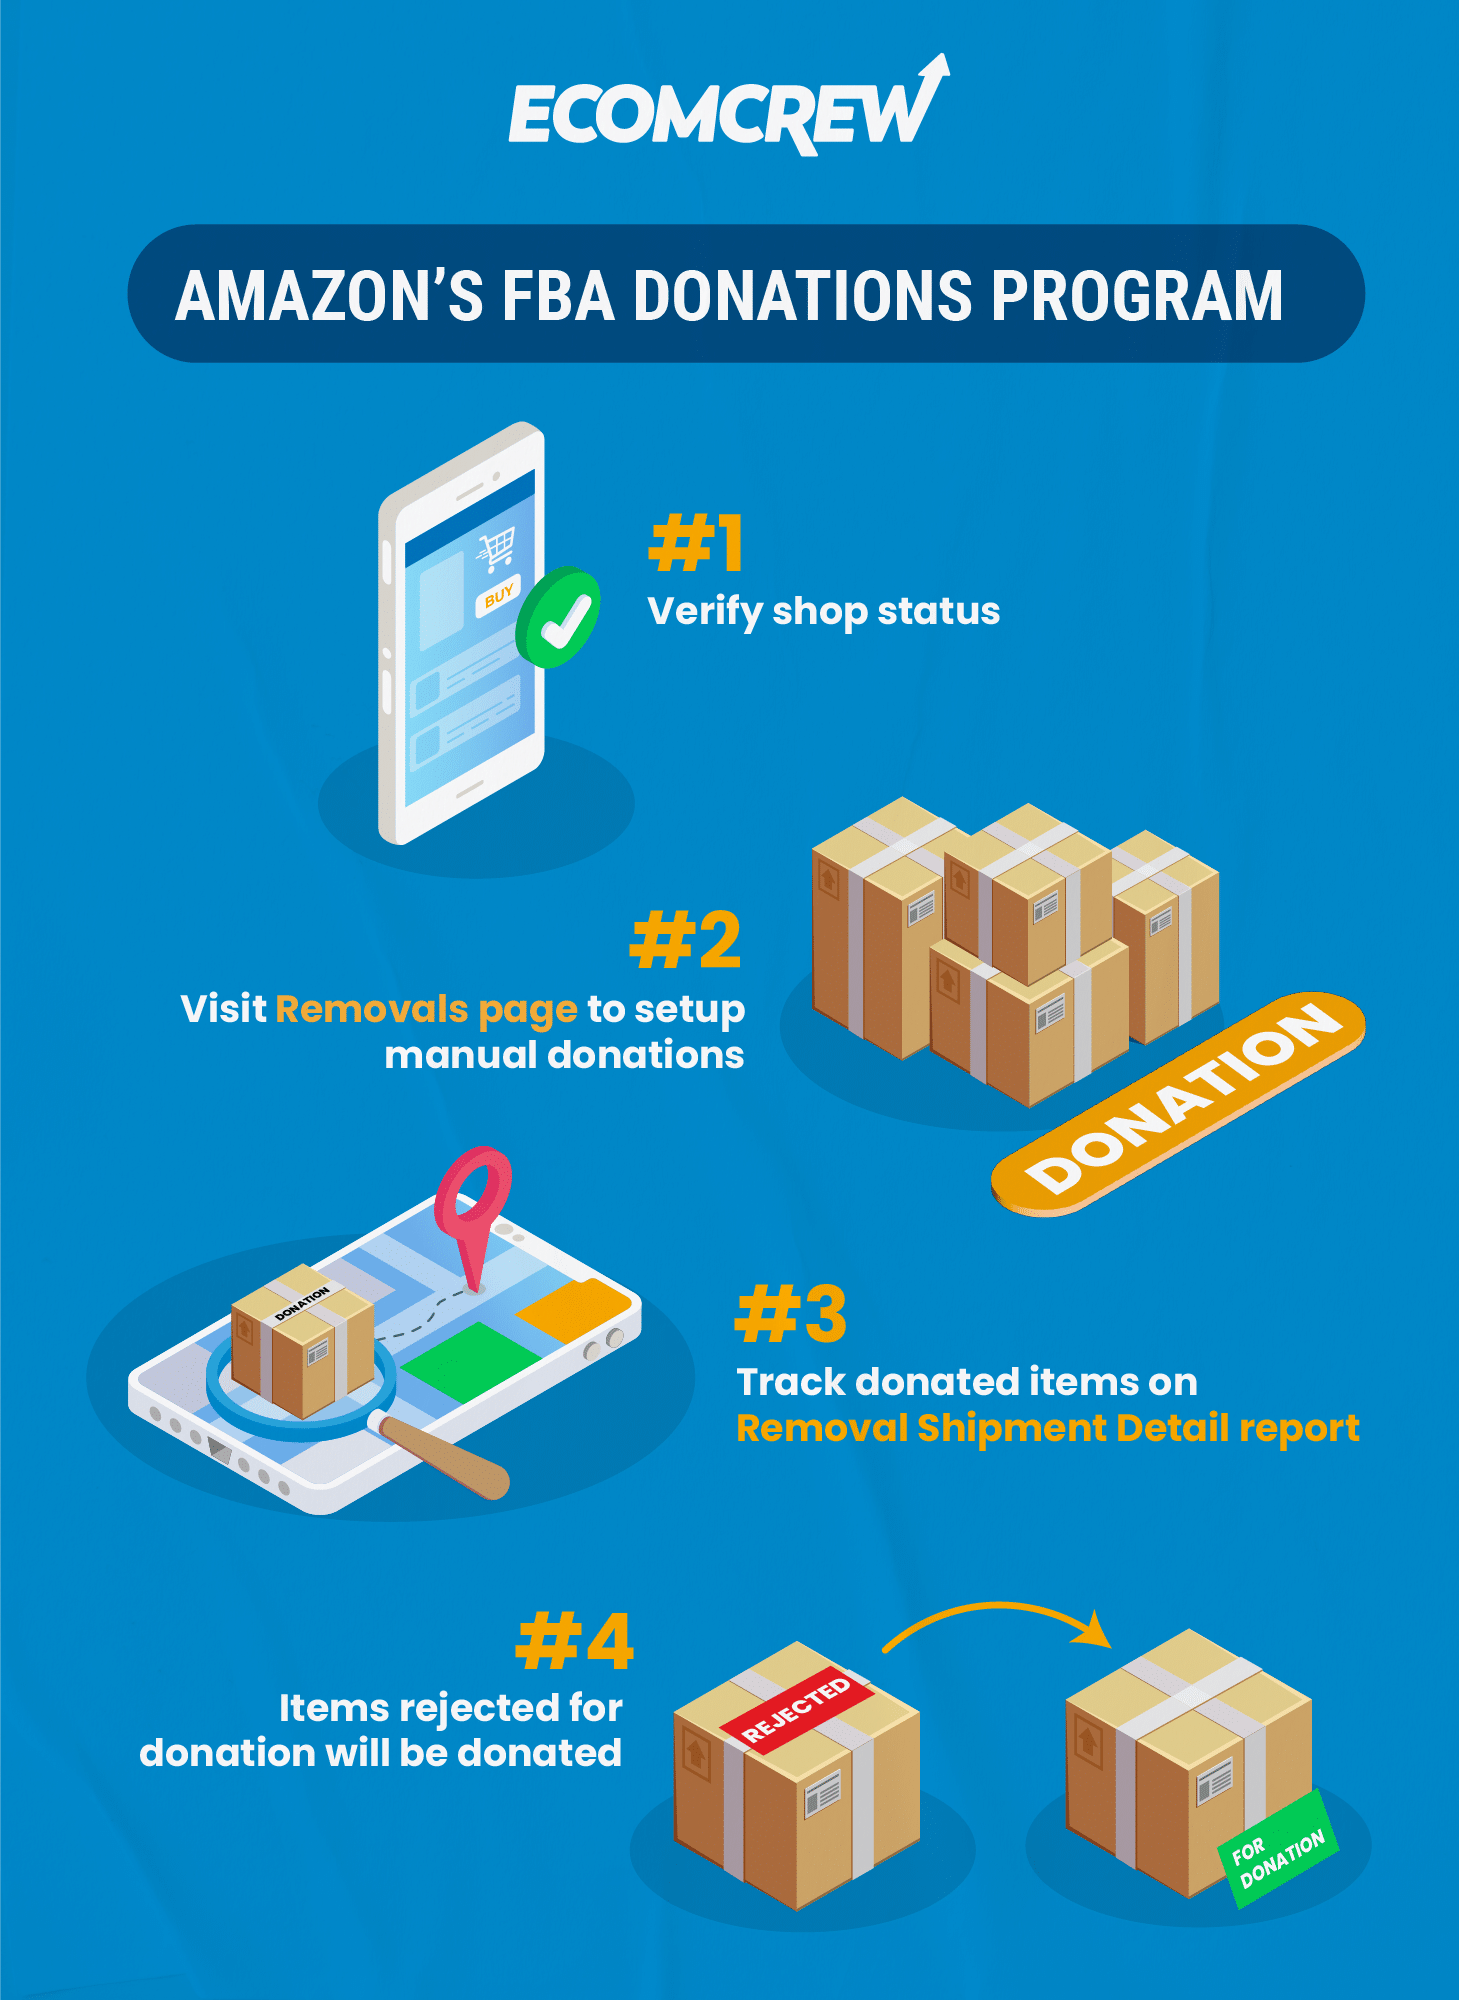 step by step process of Amazon's FBA Donations program